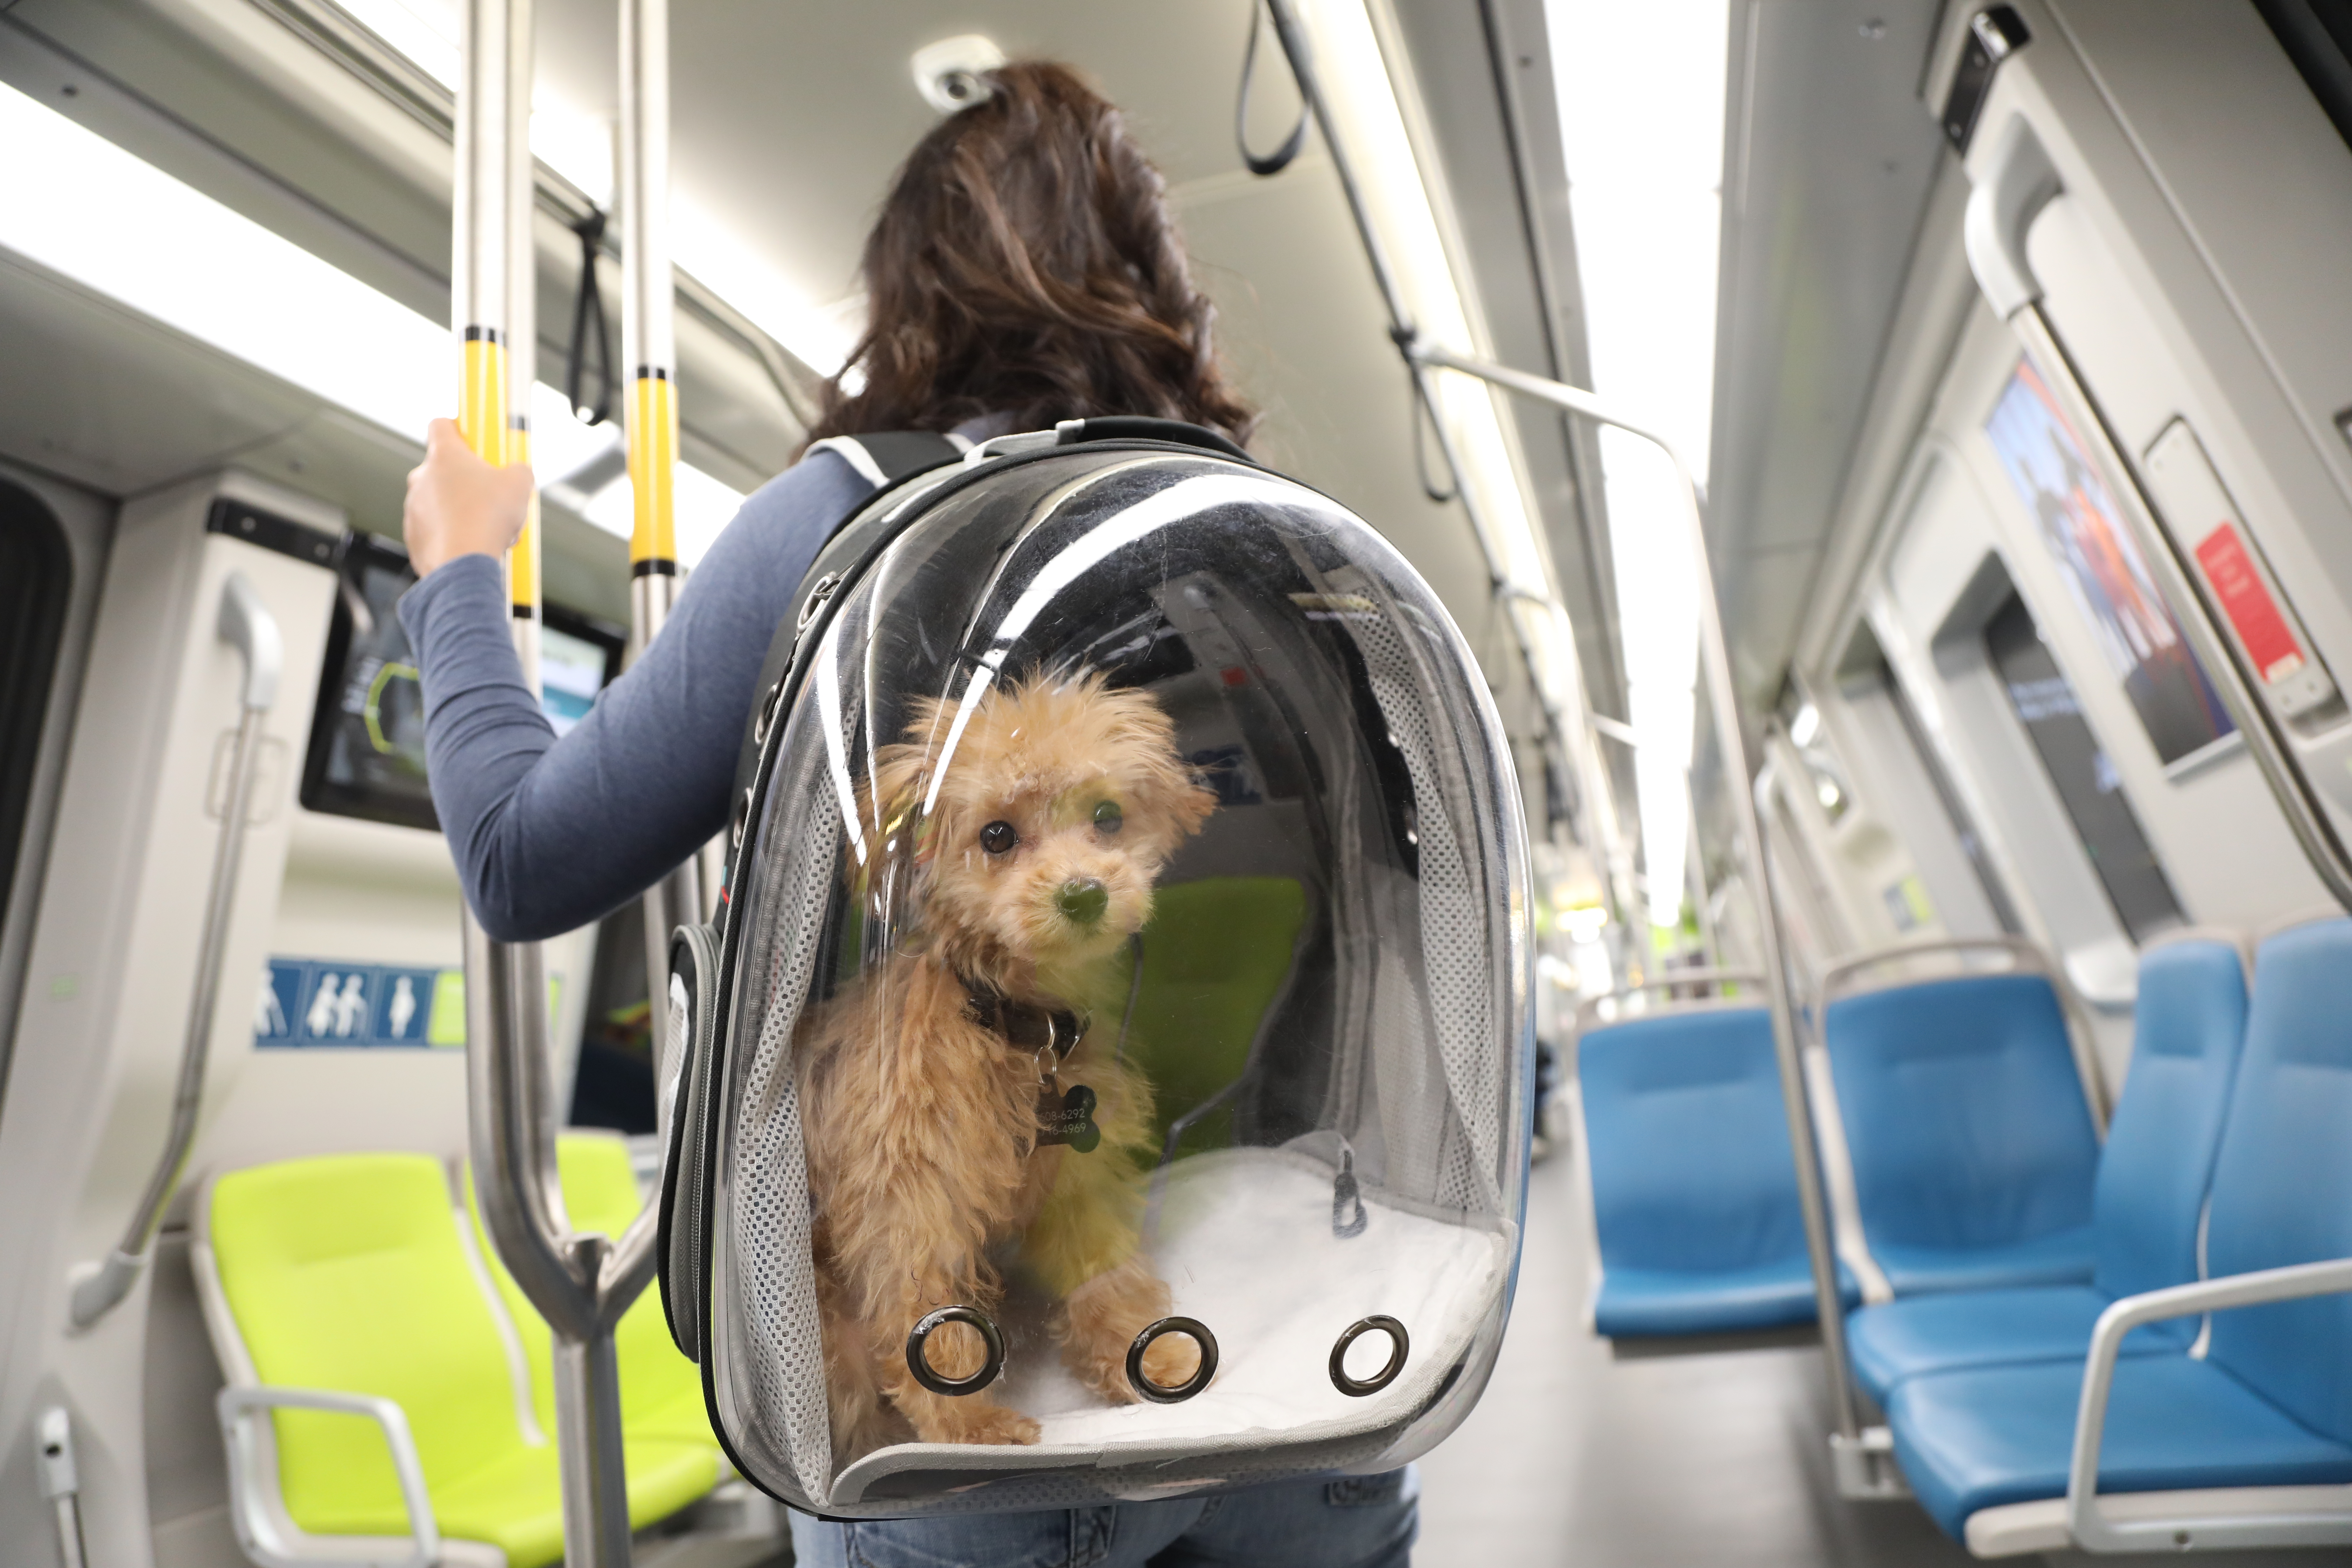 A pet in a carrier on board a train